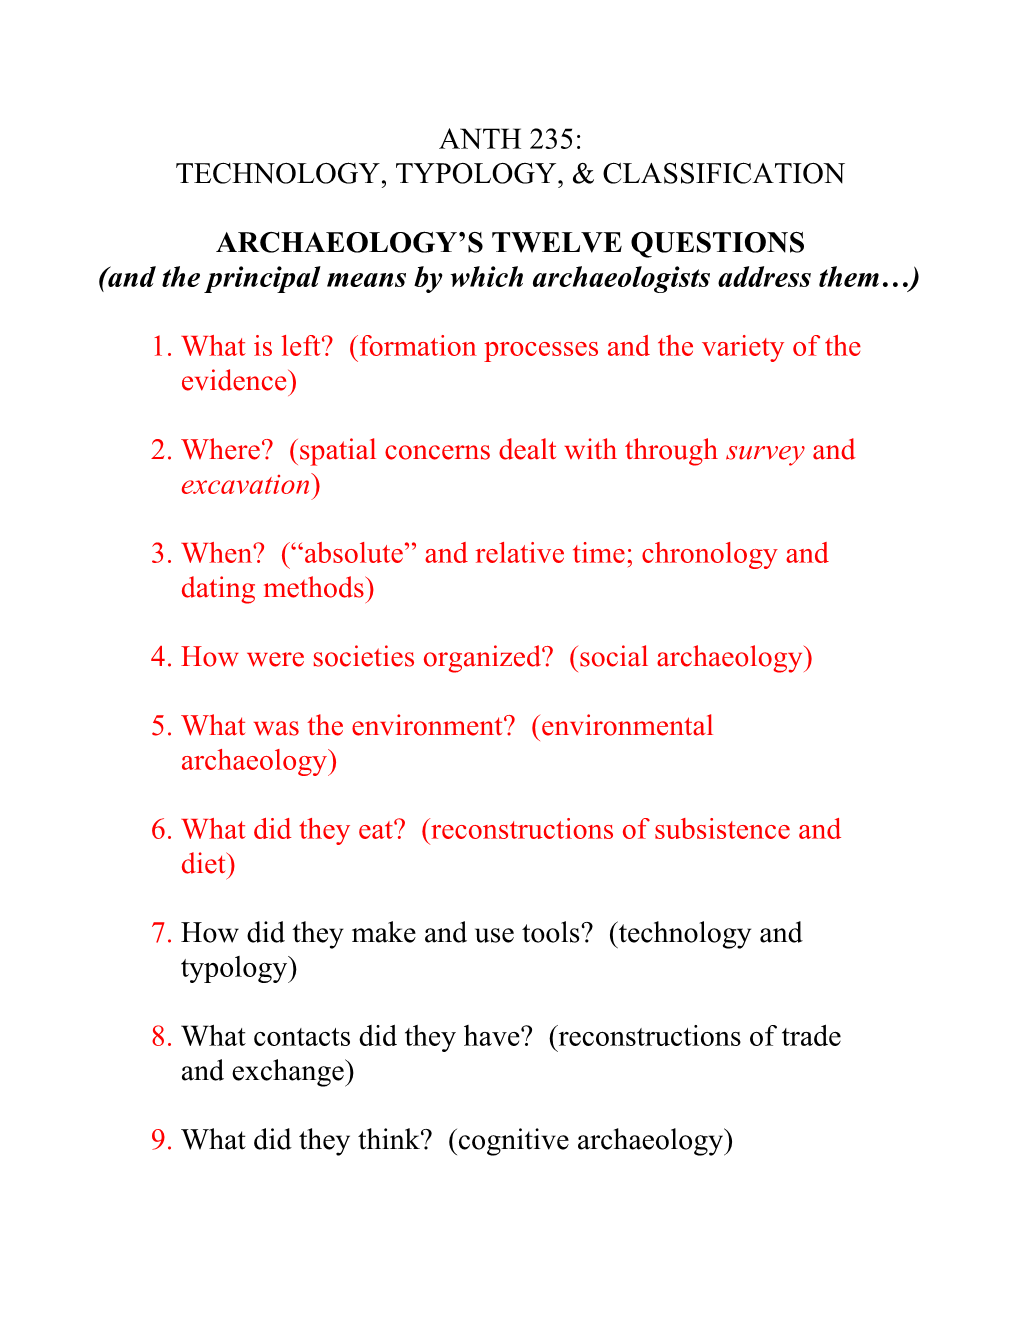 Anth 235: Technology, Typology, & Classification